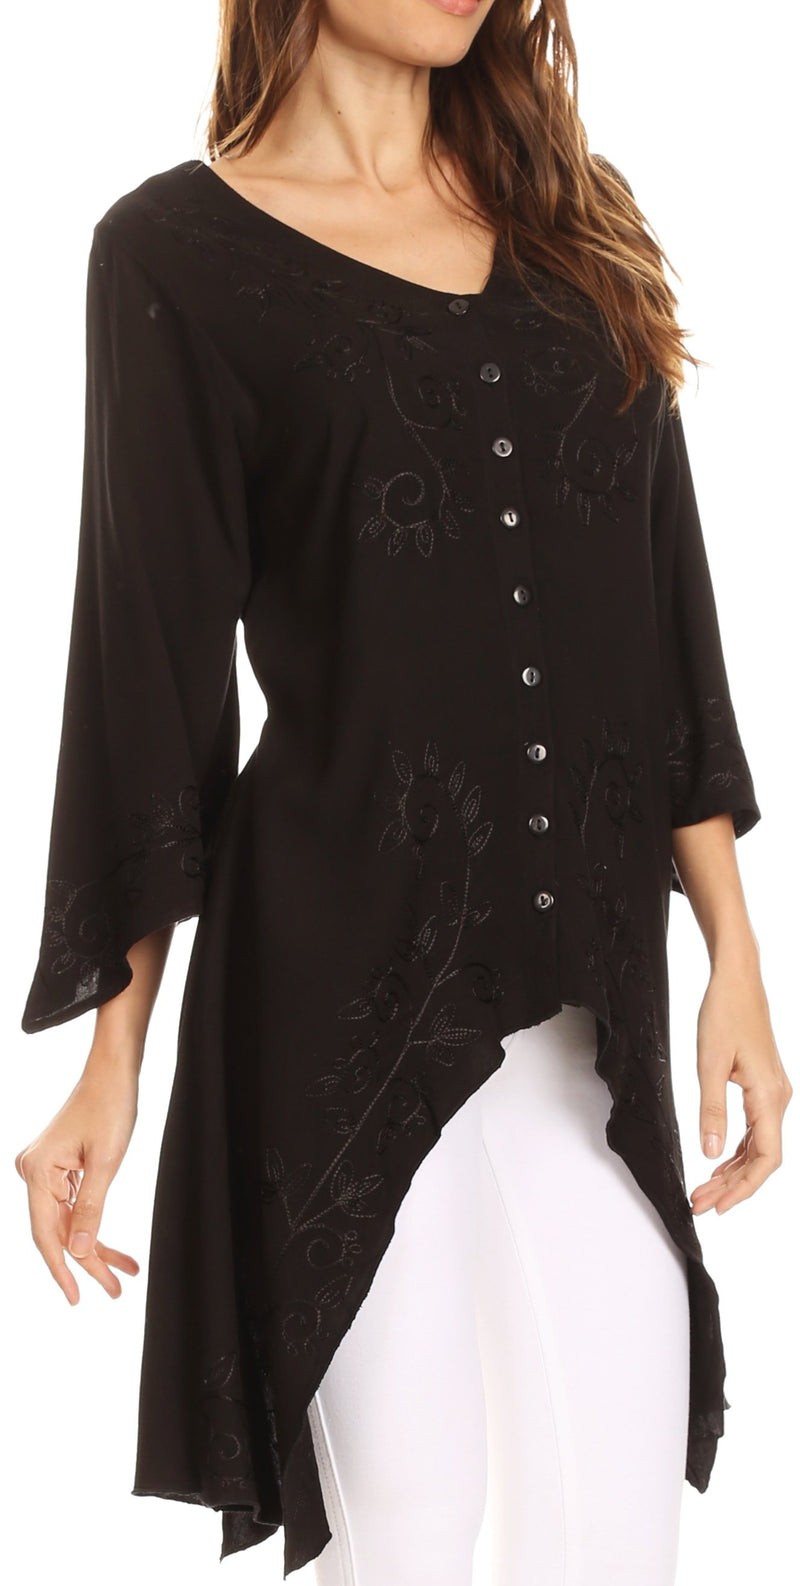 Sakkas Gella Button Down Blouse Top With Bell Sleeves And Handkerchief Sides